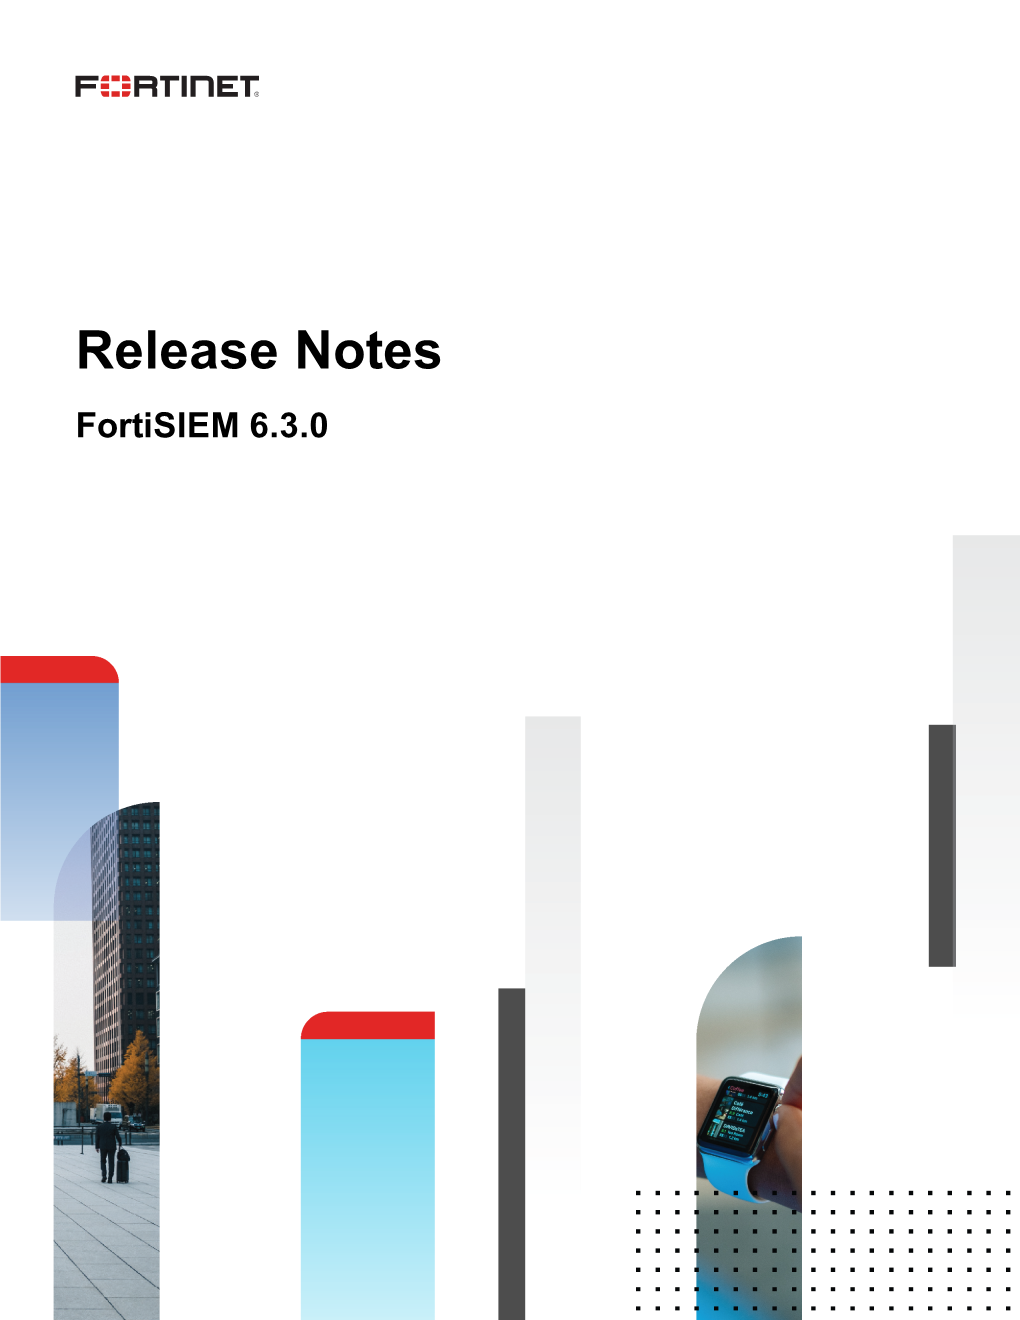 Fortisiem Release Notes